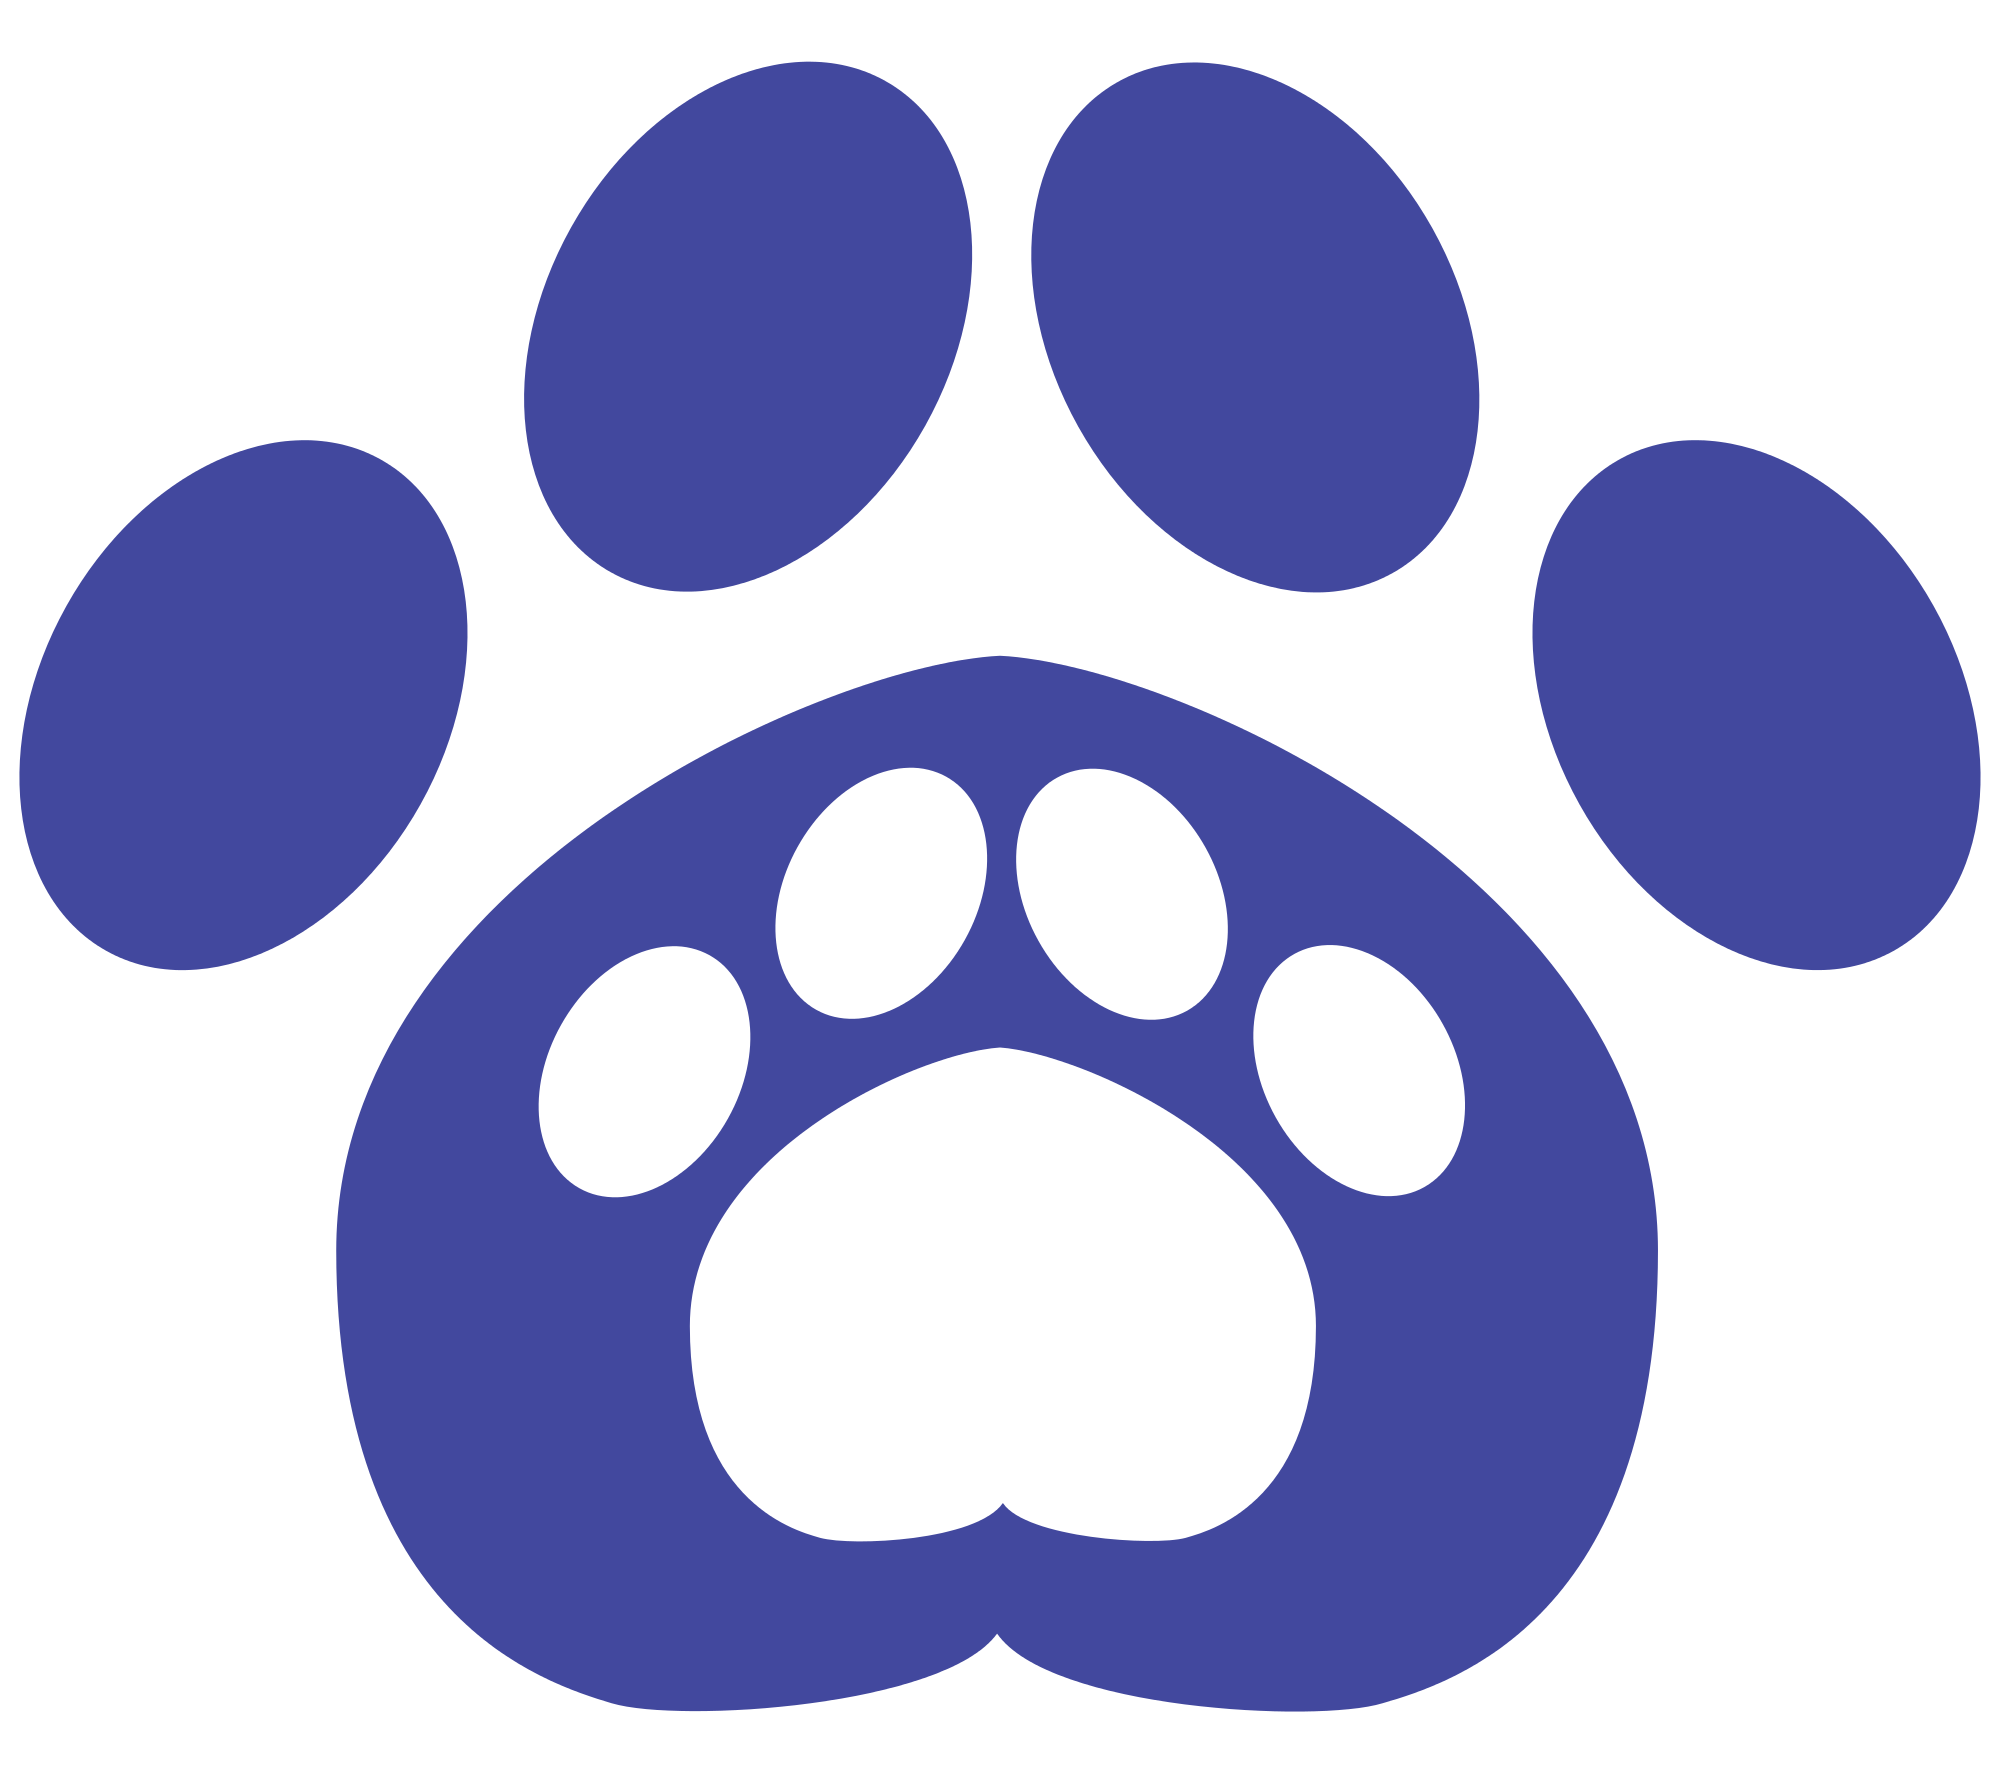 File:Furry blue paw vector logo.svg